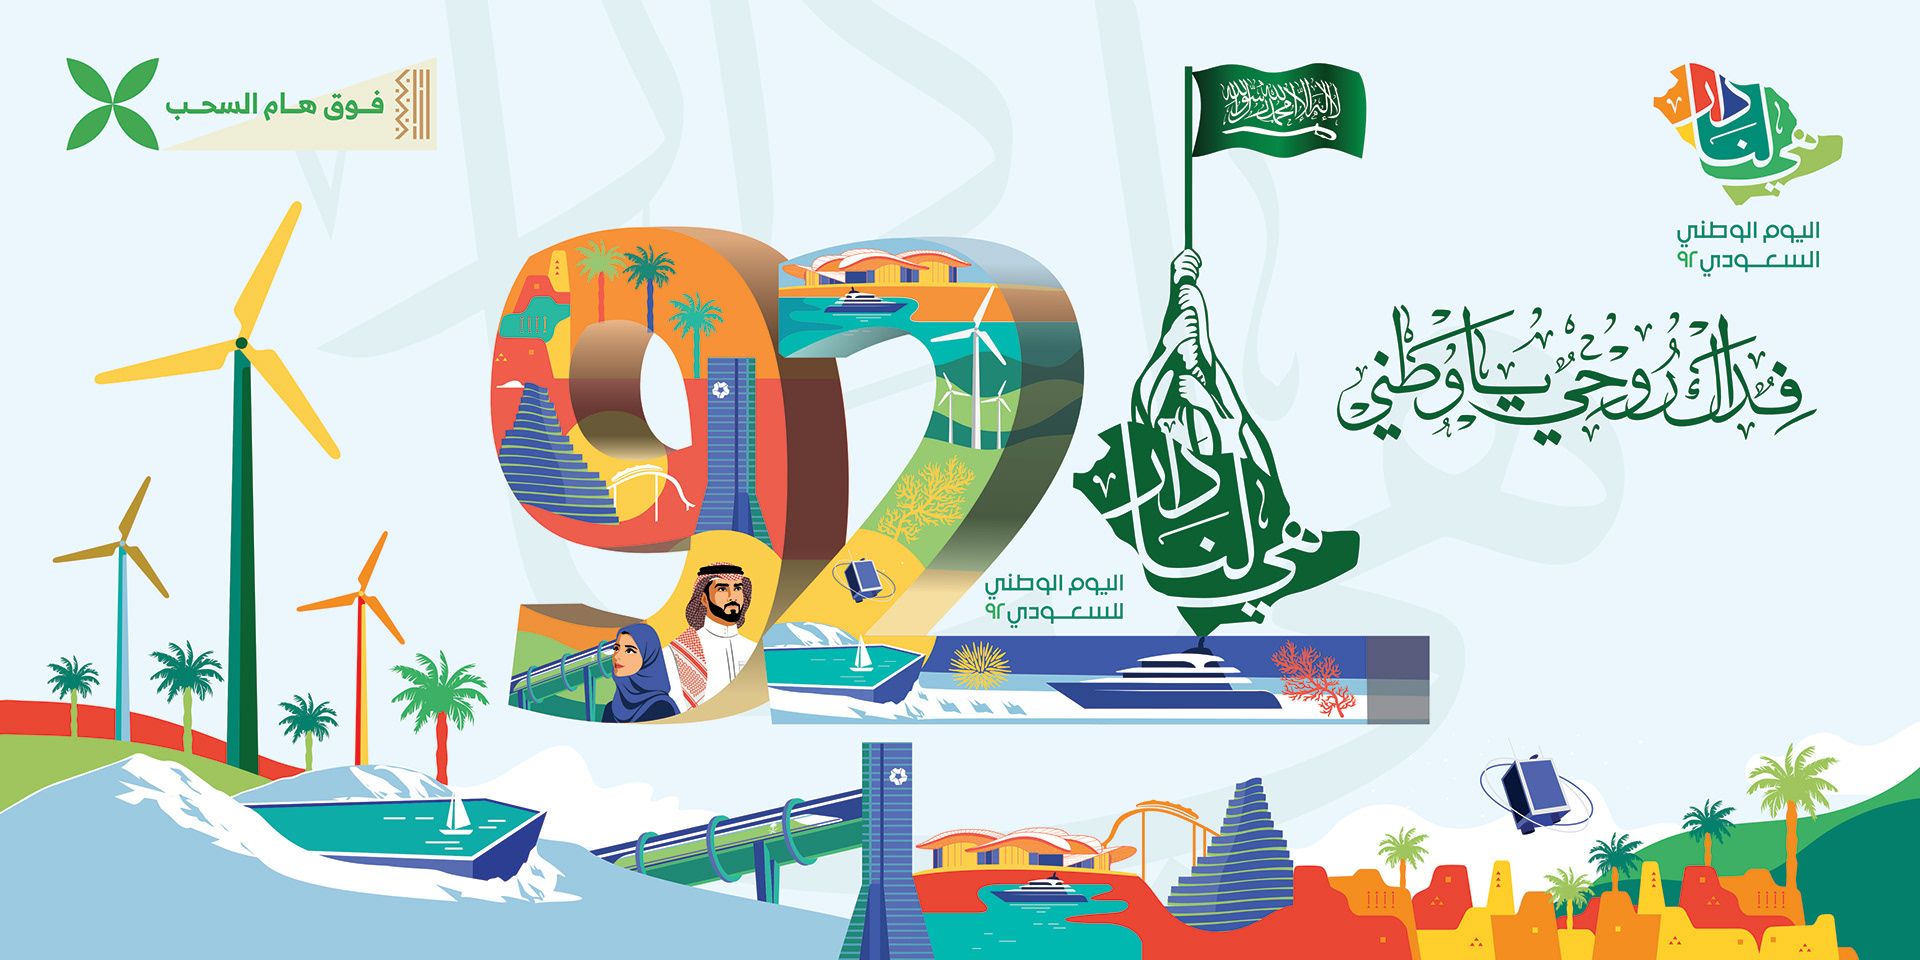 The logo of the 92nd Saudi National Day and the identity of the Saudi